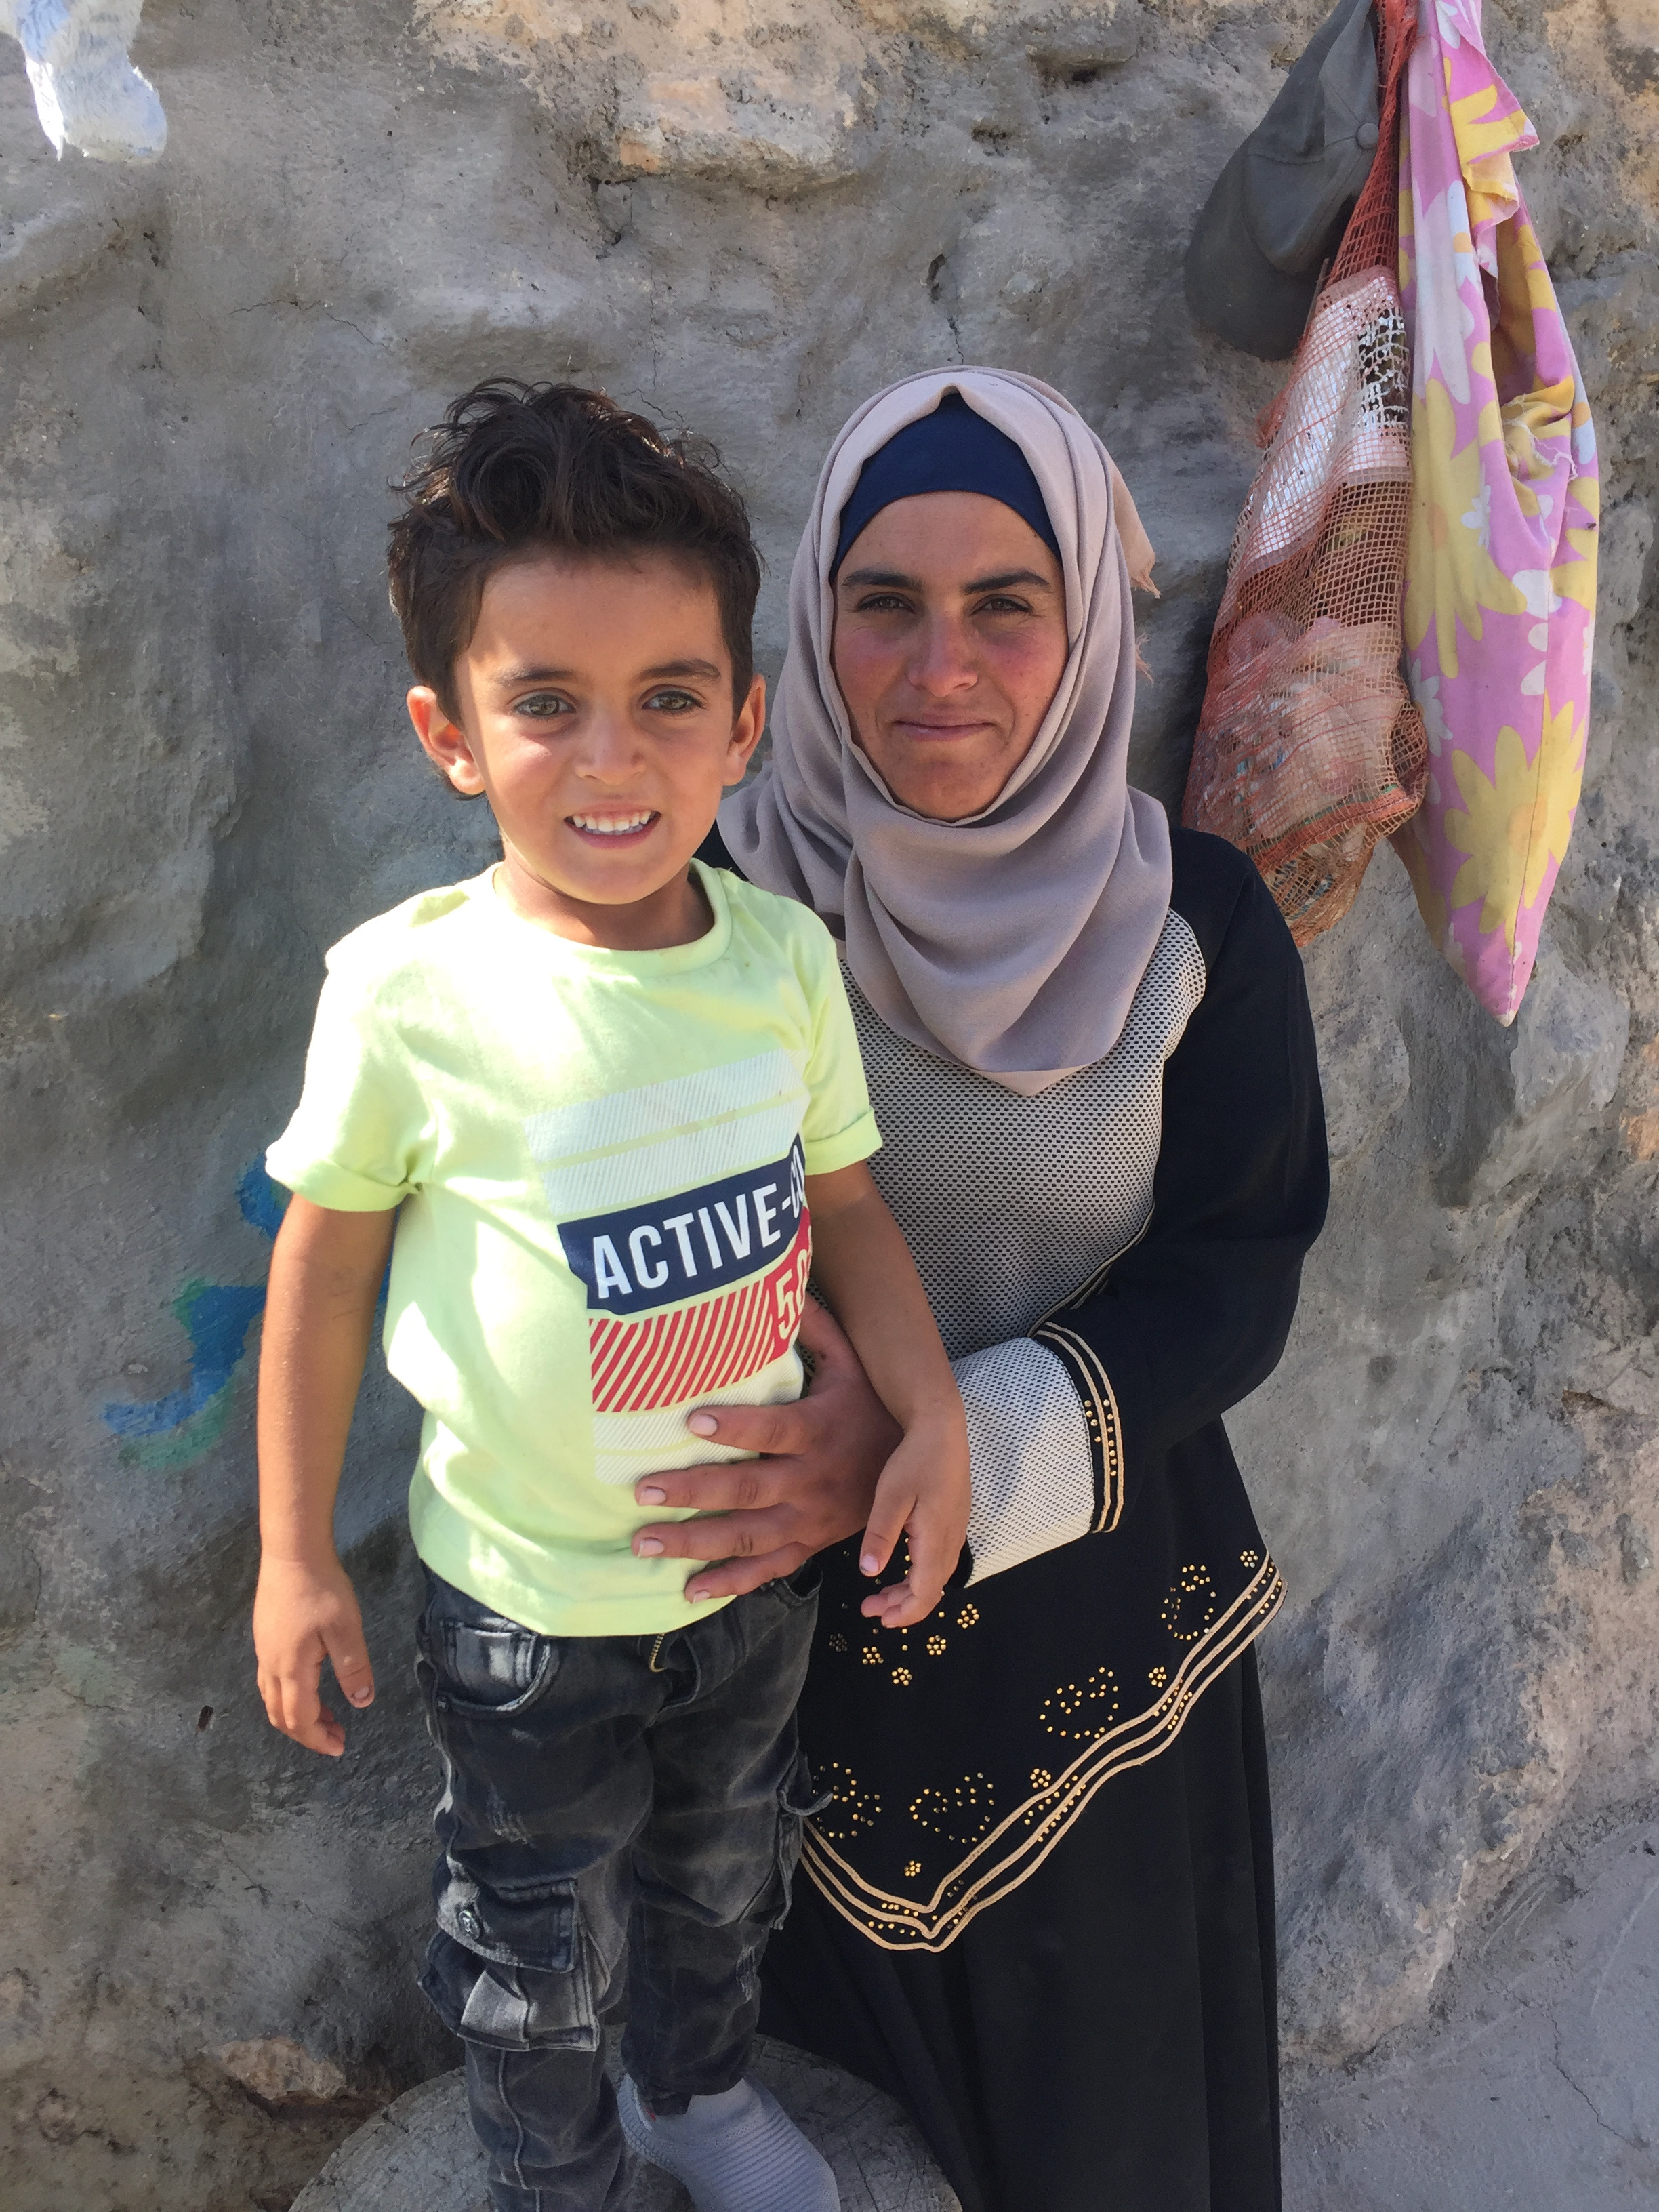 Three-year-old Muhammad Bakr Hussein with his mother Bara'a Hamandi in front of the family's home in the West Bank village of Mufkara (photo: Inge Gunther)